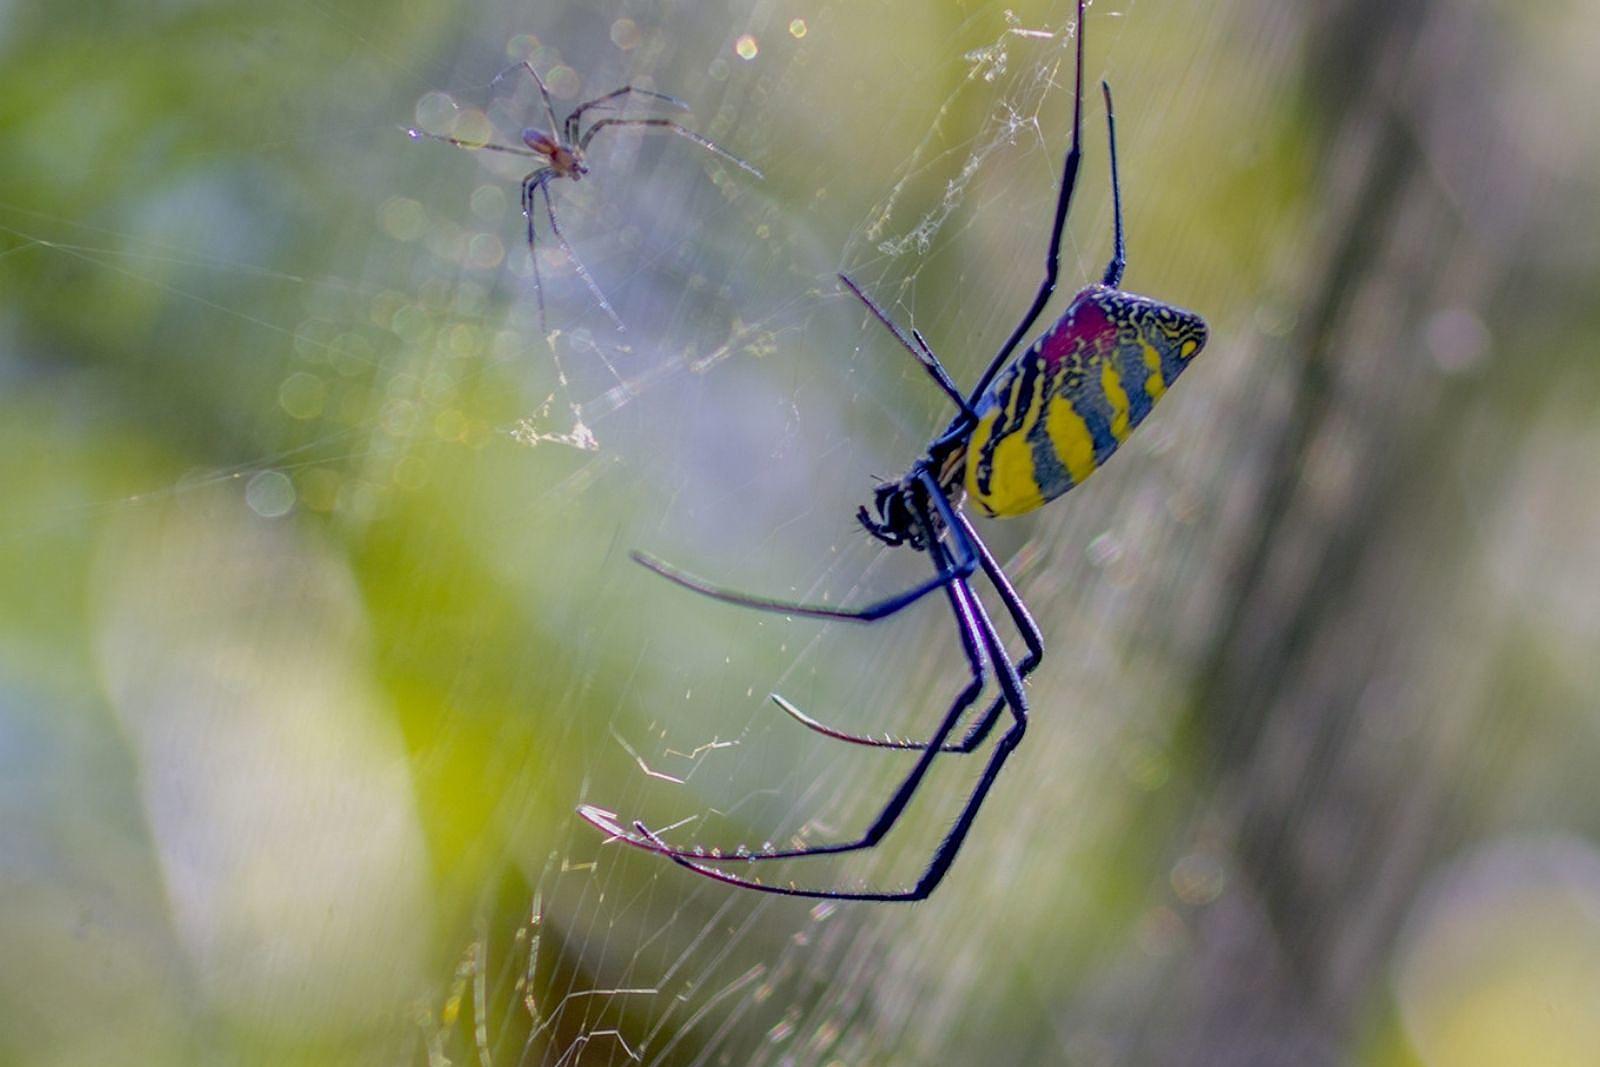 Joro Spiders Look Frightening, but They May Be Scaredy-Cats - The New York  Times